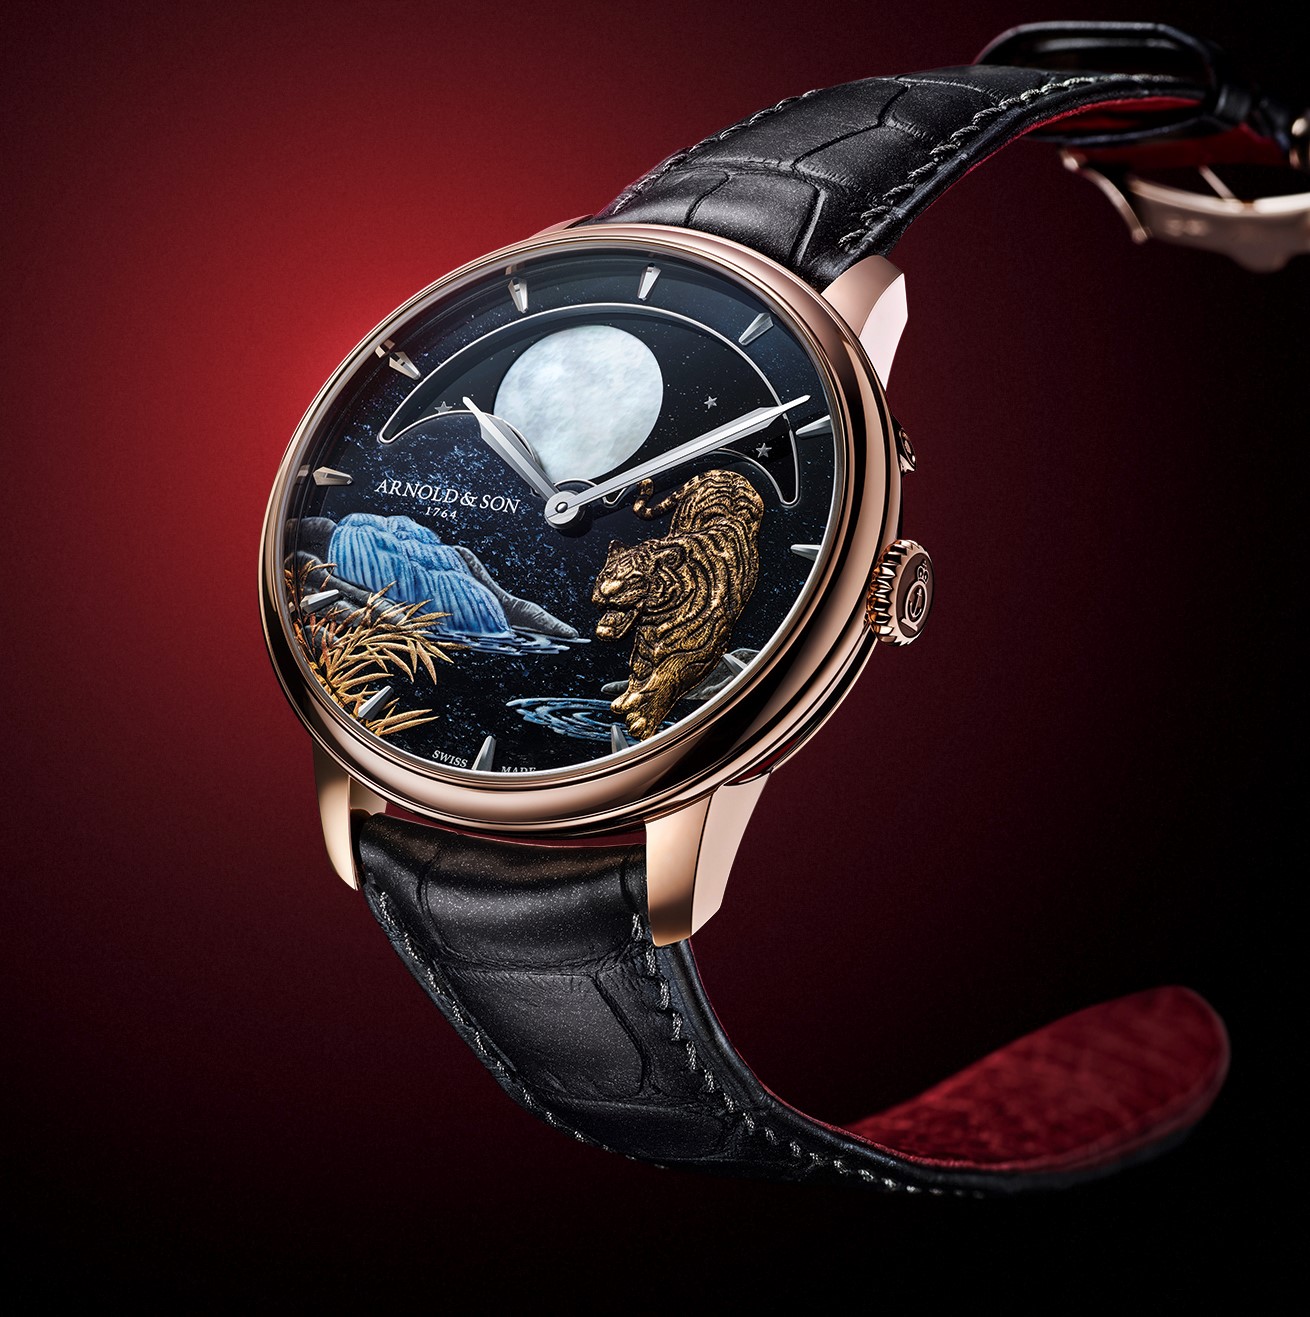 Ready for the Chinese New Year, Arnold & Son Debuts the “Year of the Tiger” Perpetual Moon